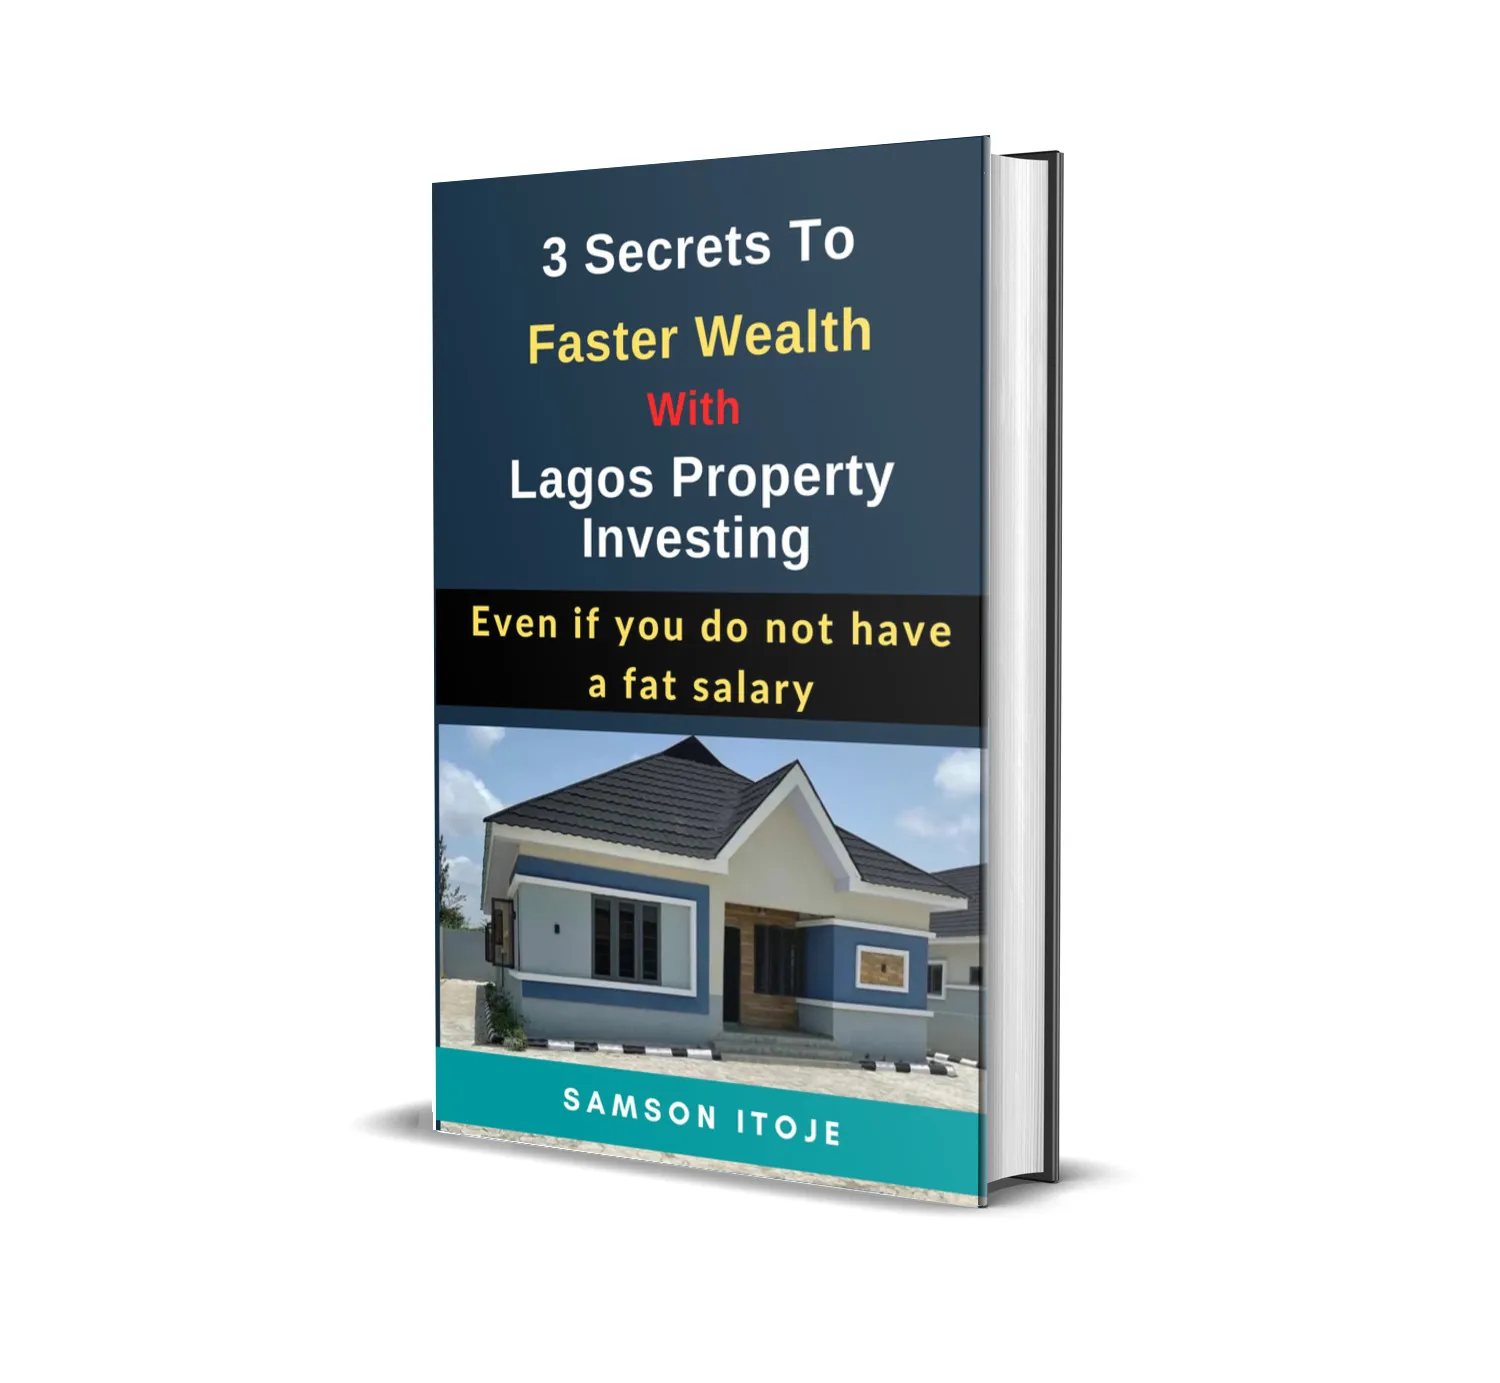 3 secrets to faster wealth with lagos property investing